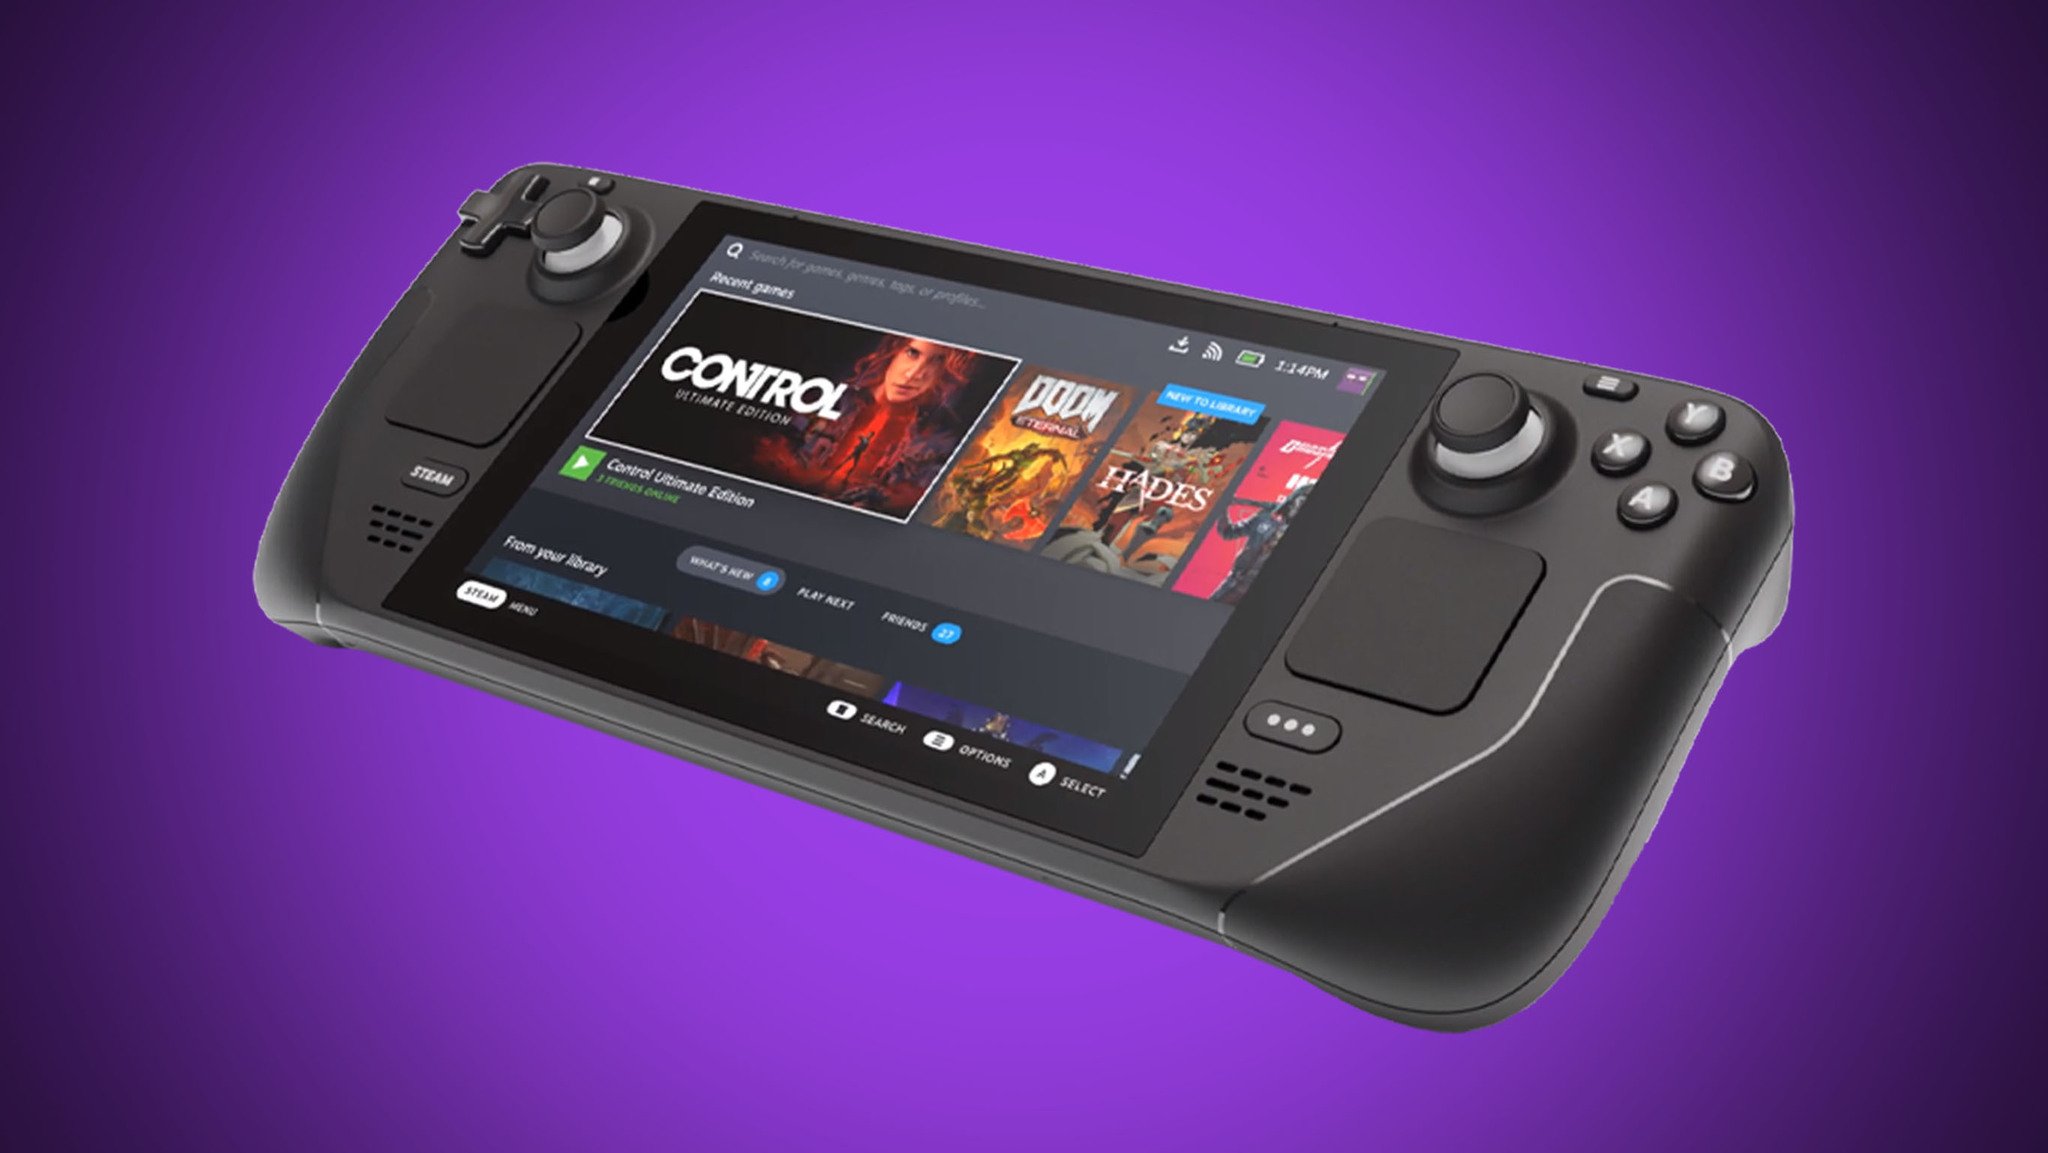 Valve Announces the Steam Deck, a $400 Handheld Gaming PC - IGN